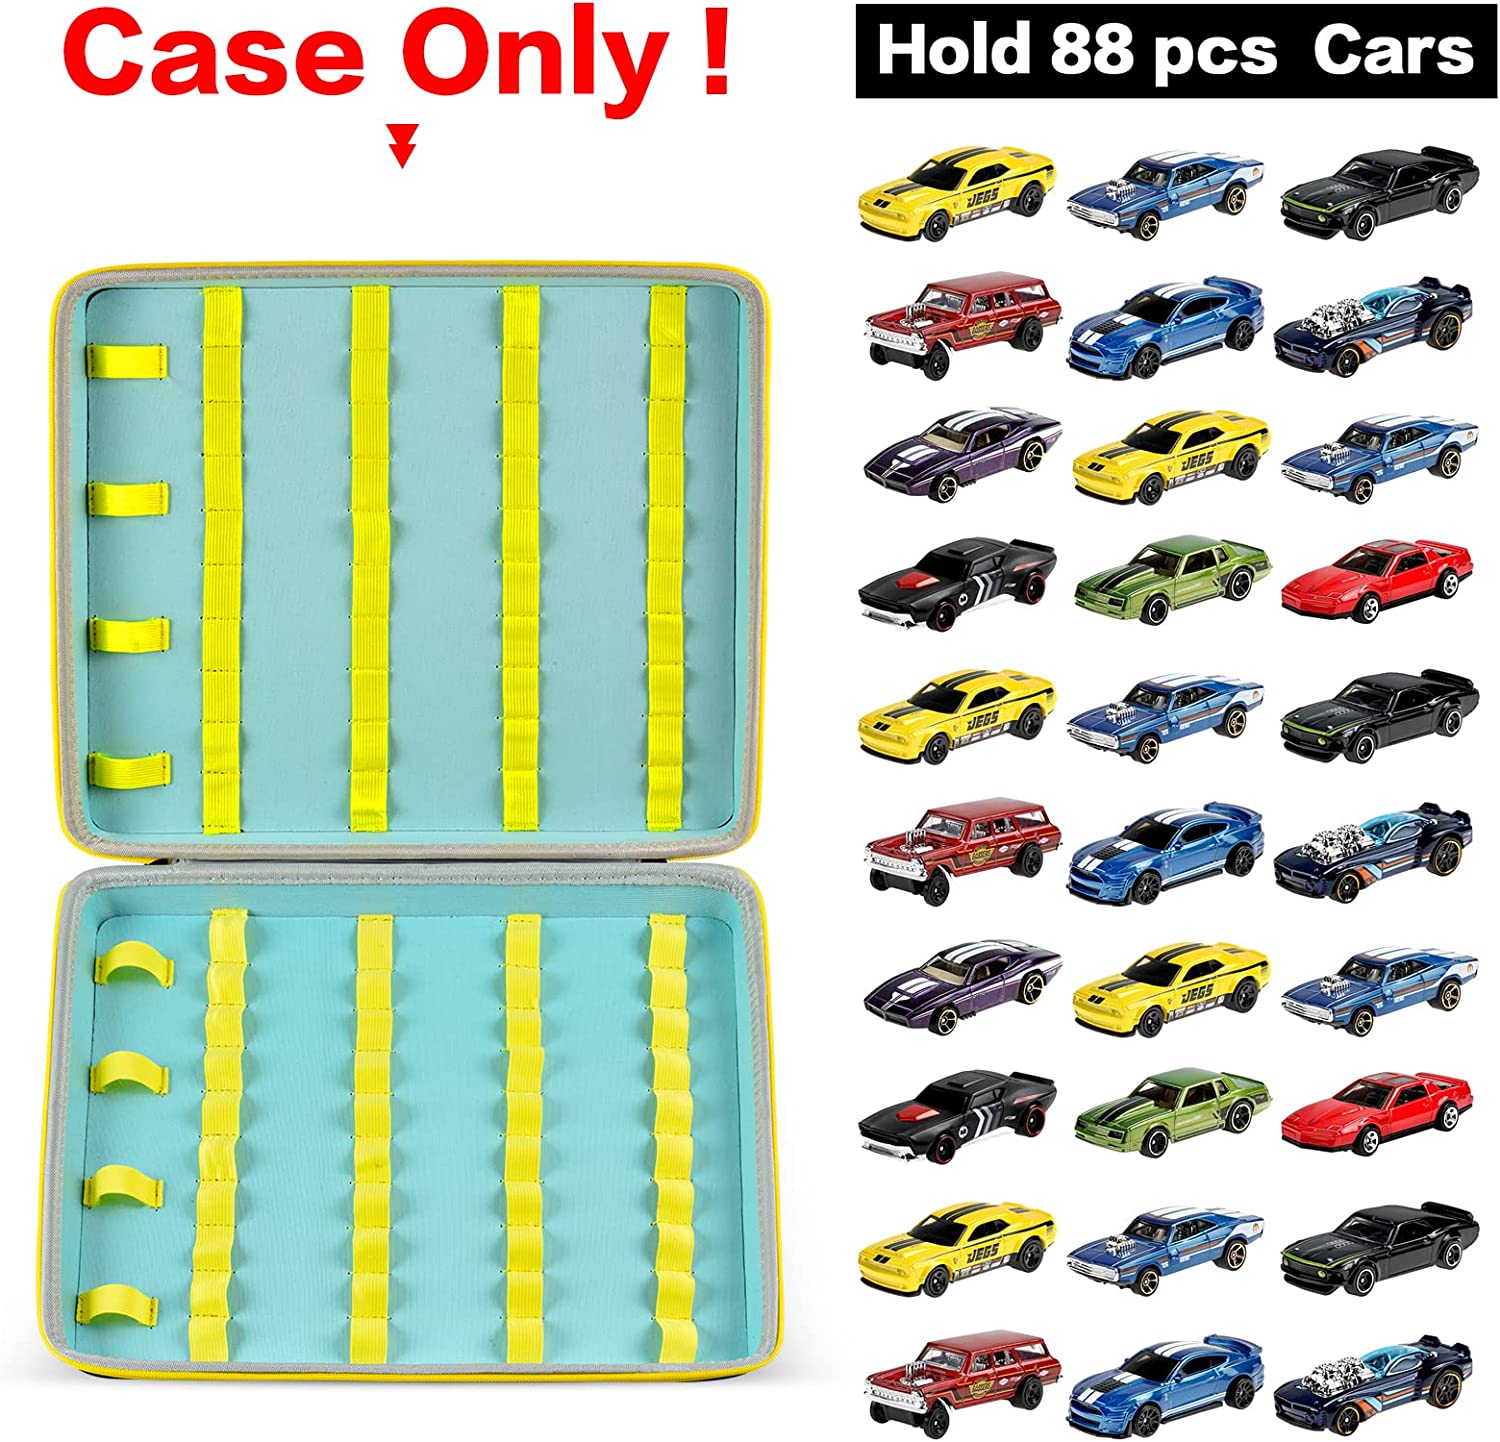 Toy Car Organizer Case: Ideal for Hot Wheels and Matchbox Cars Storage